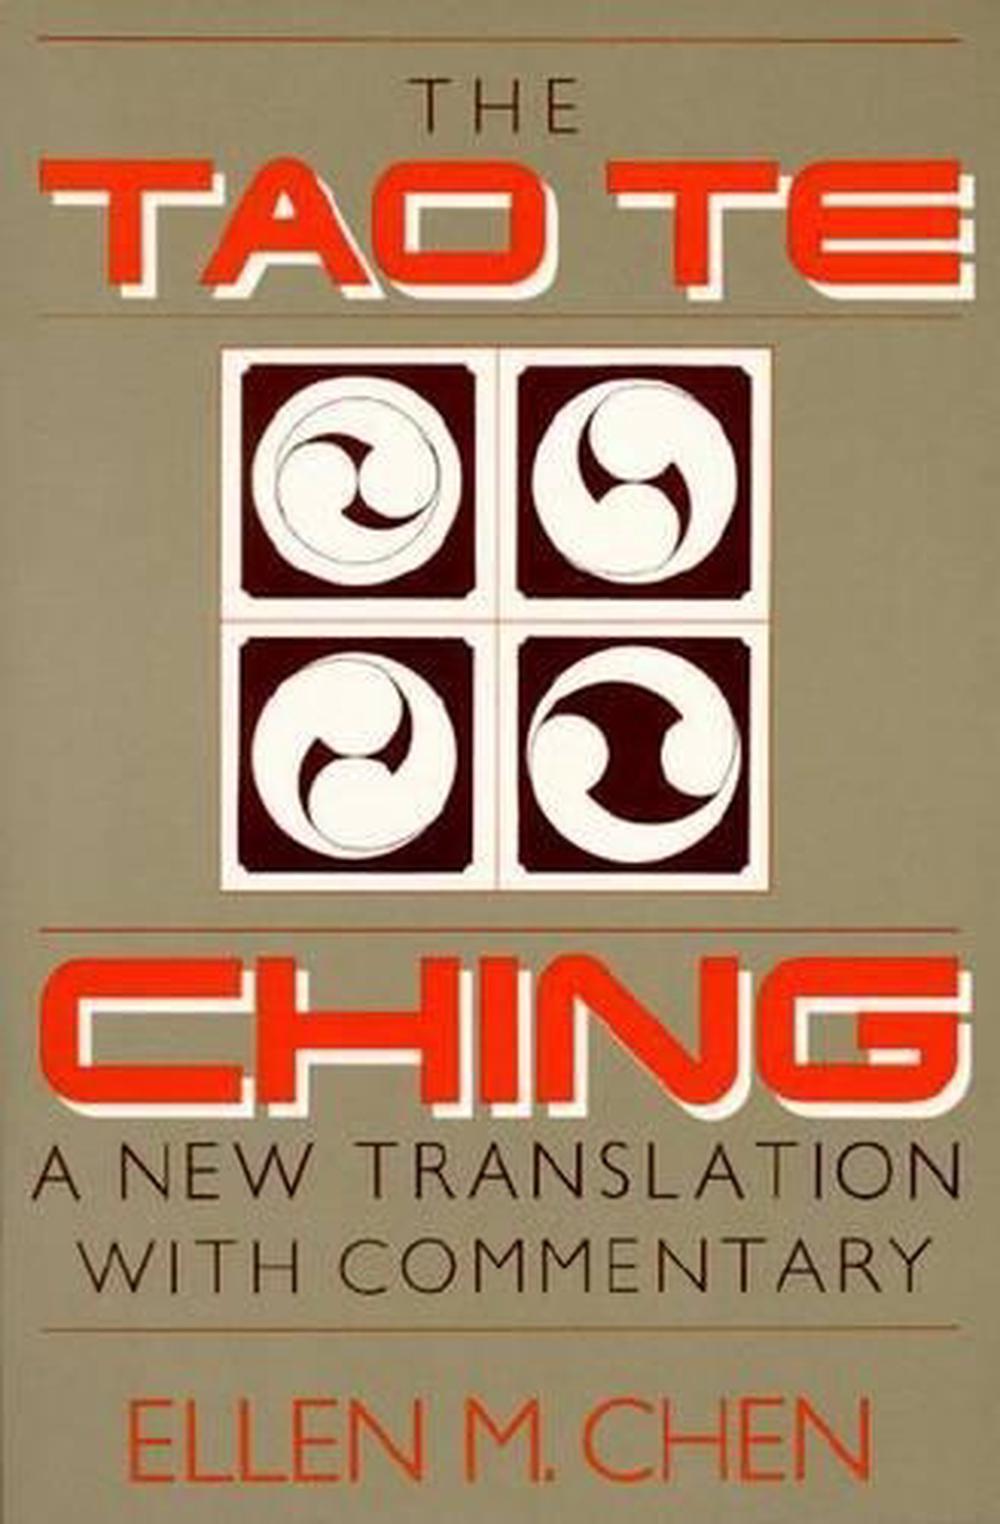 tao te ching meaning in english